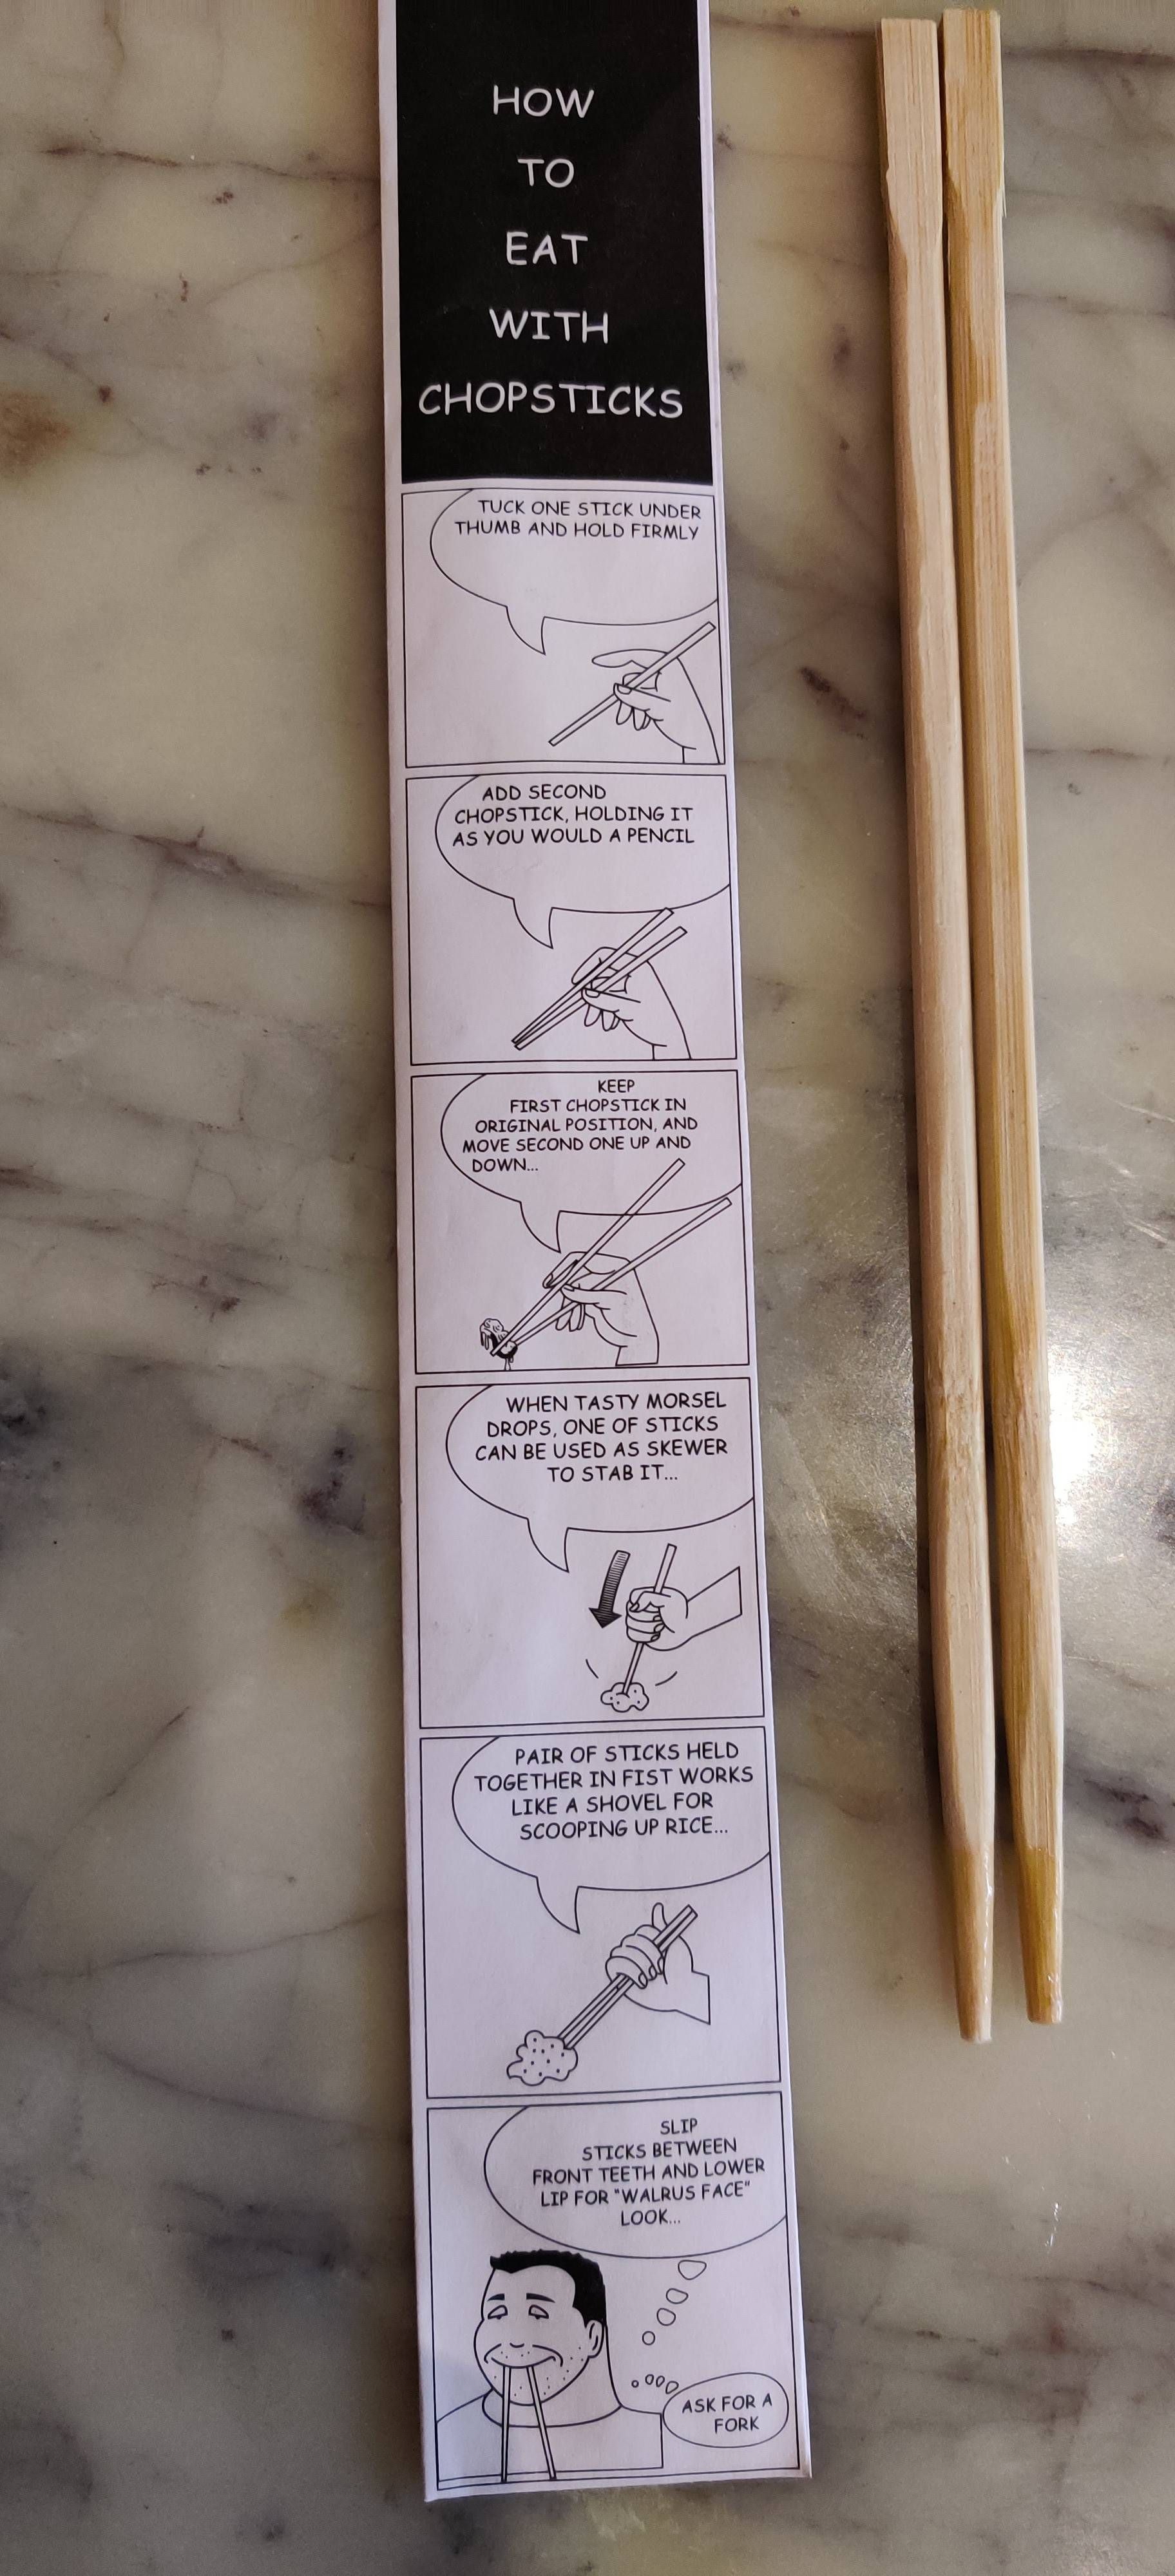 Local asian restaurant has instructions on how to use chopsticks, including what to do if you can't